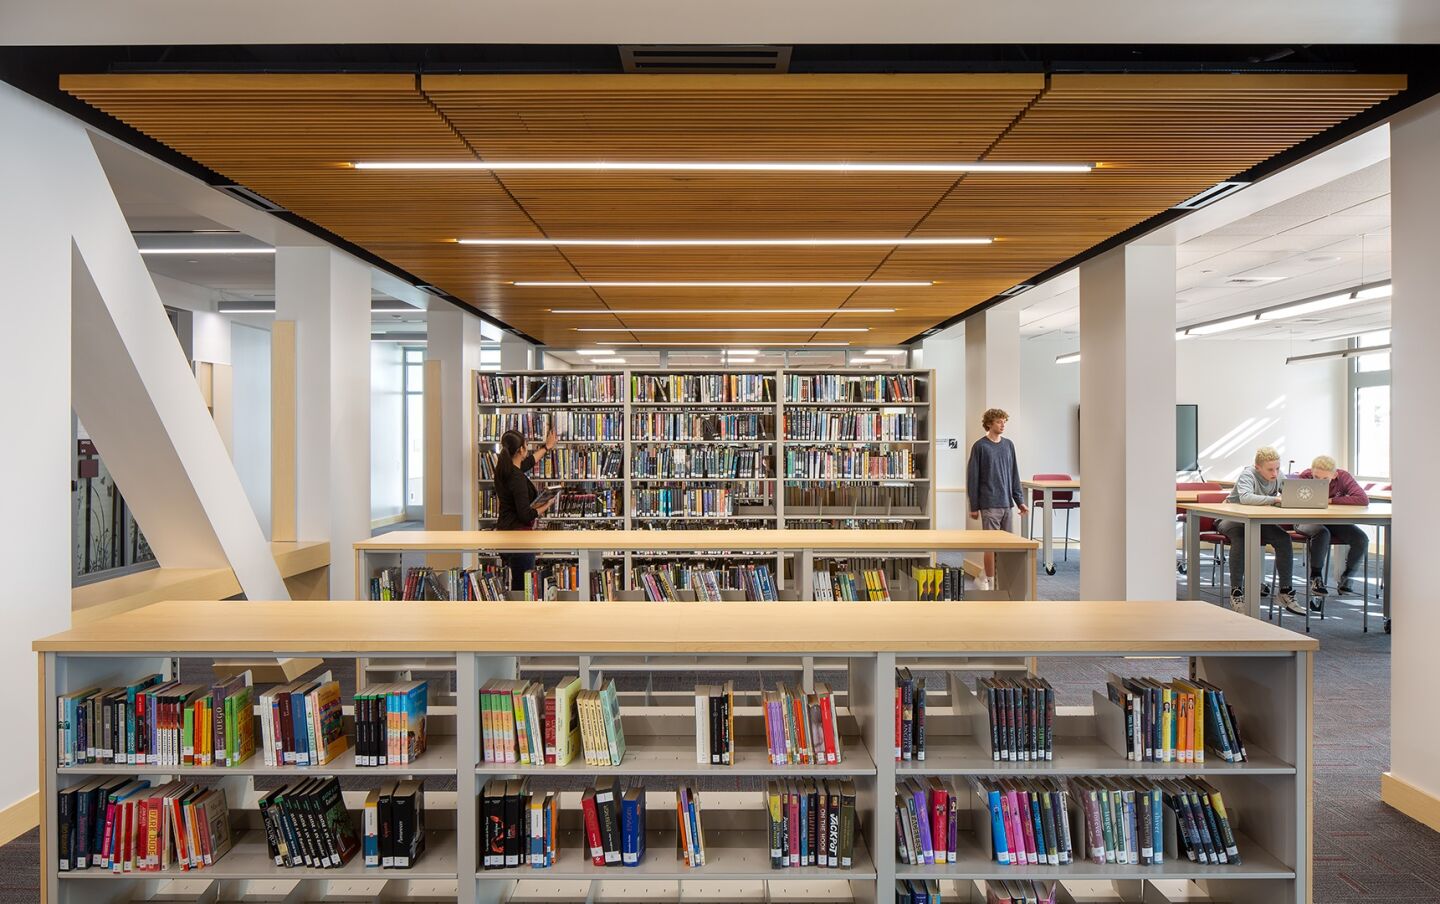 Point Loma High School's new 38,000-square-foot three-story building includes a library/media center on the first floor.